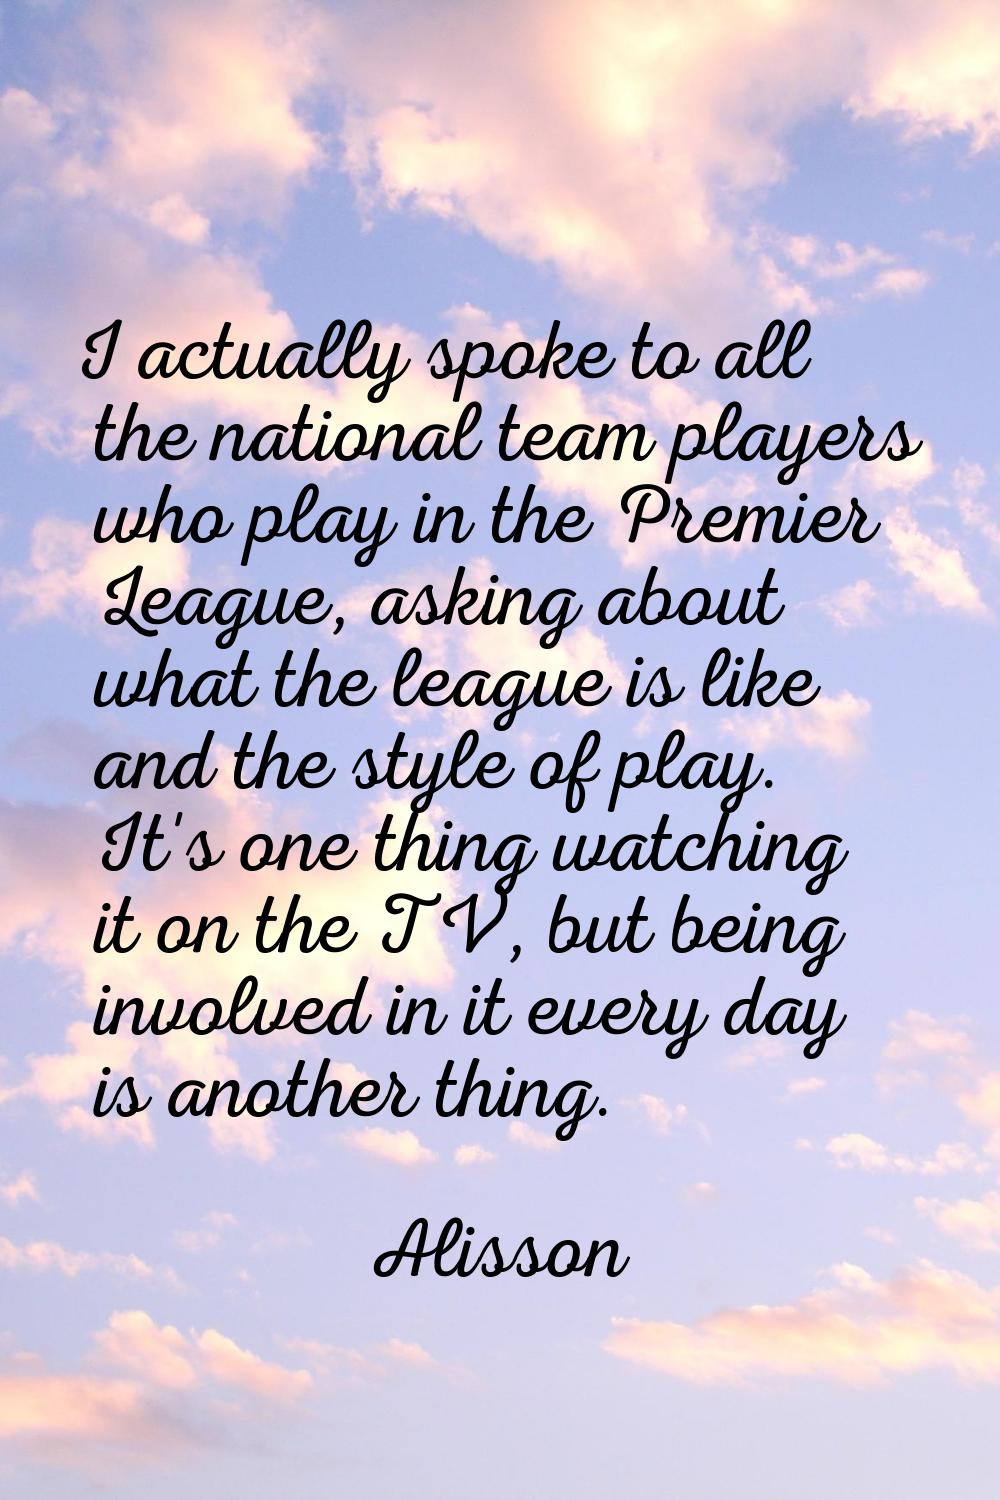 I actually spoke to all the national team players who play in the Premier League, asking about what